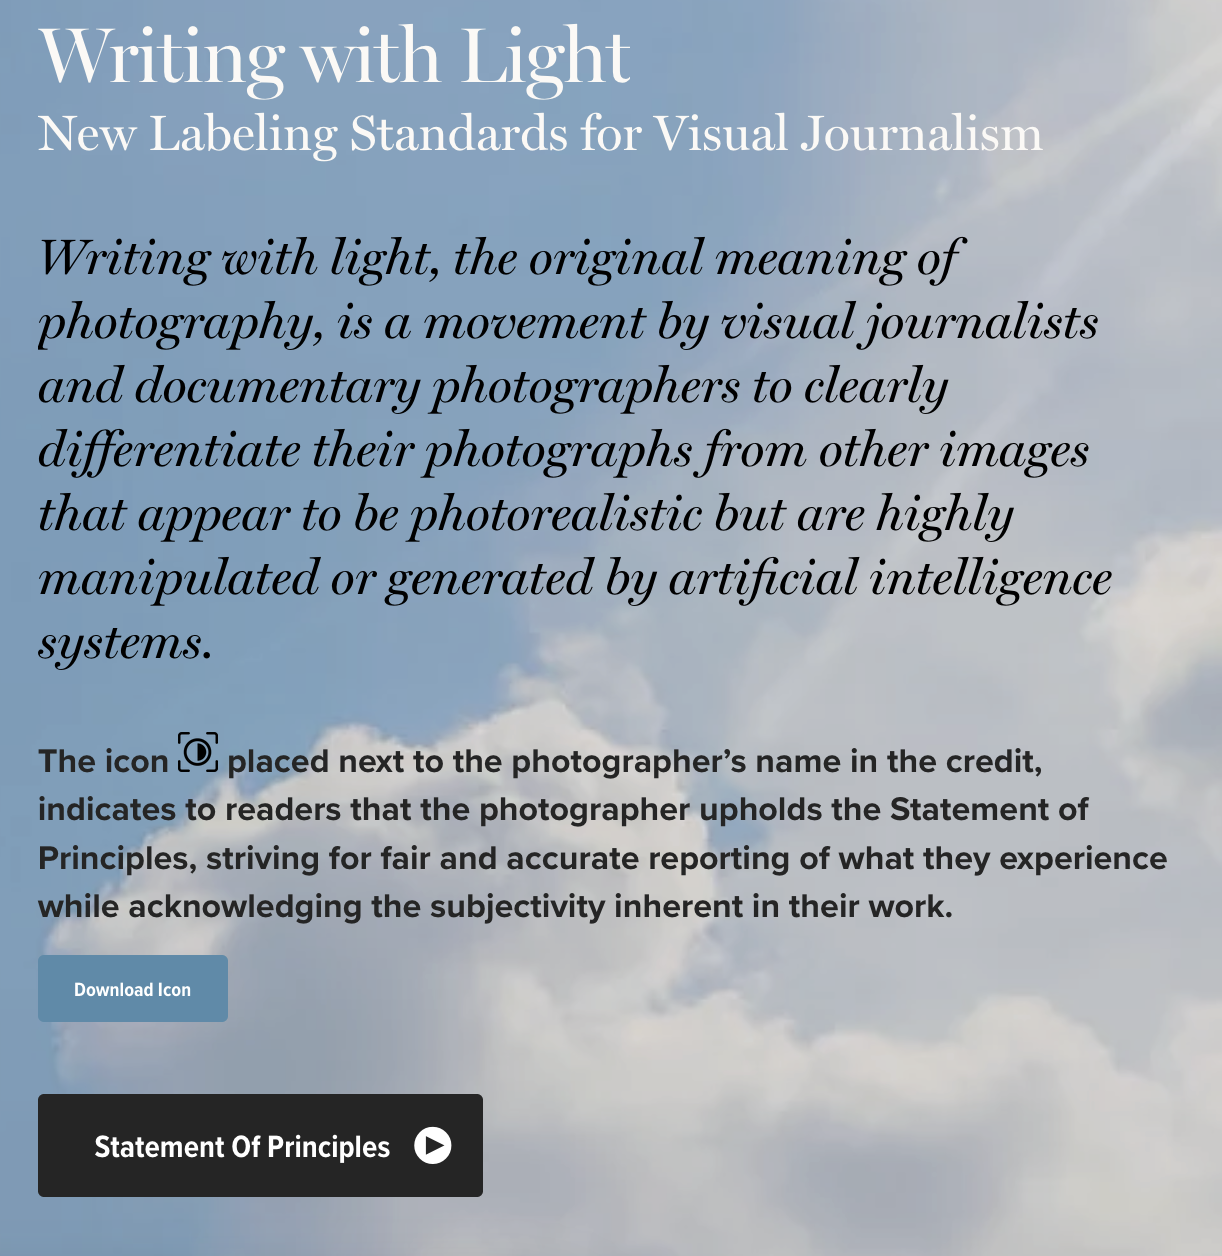 "Writing with Light" website statement about the icon used to decipher between fact and fictional photography. 